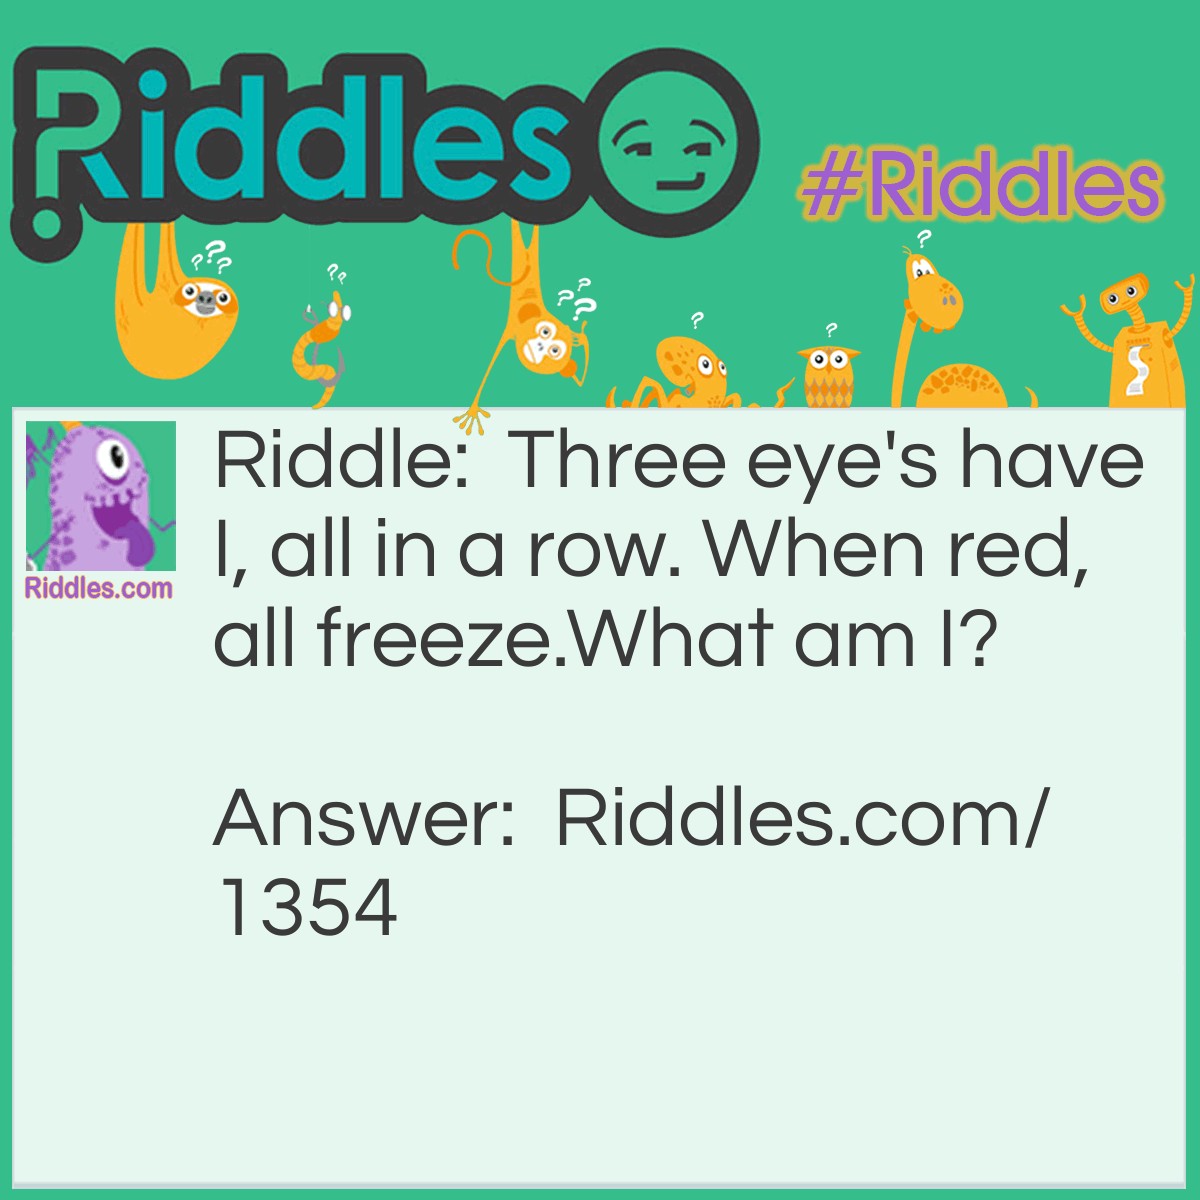 Riddle: Three eye's have I, all in a row. When red, all freeze.
What am I? Answer: A stoplight